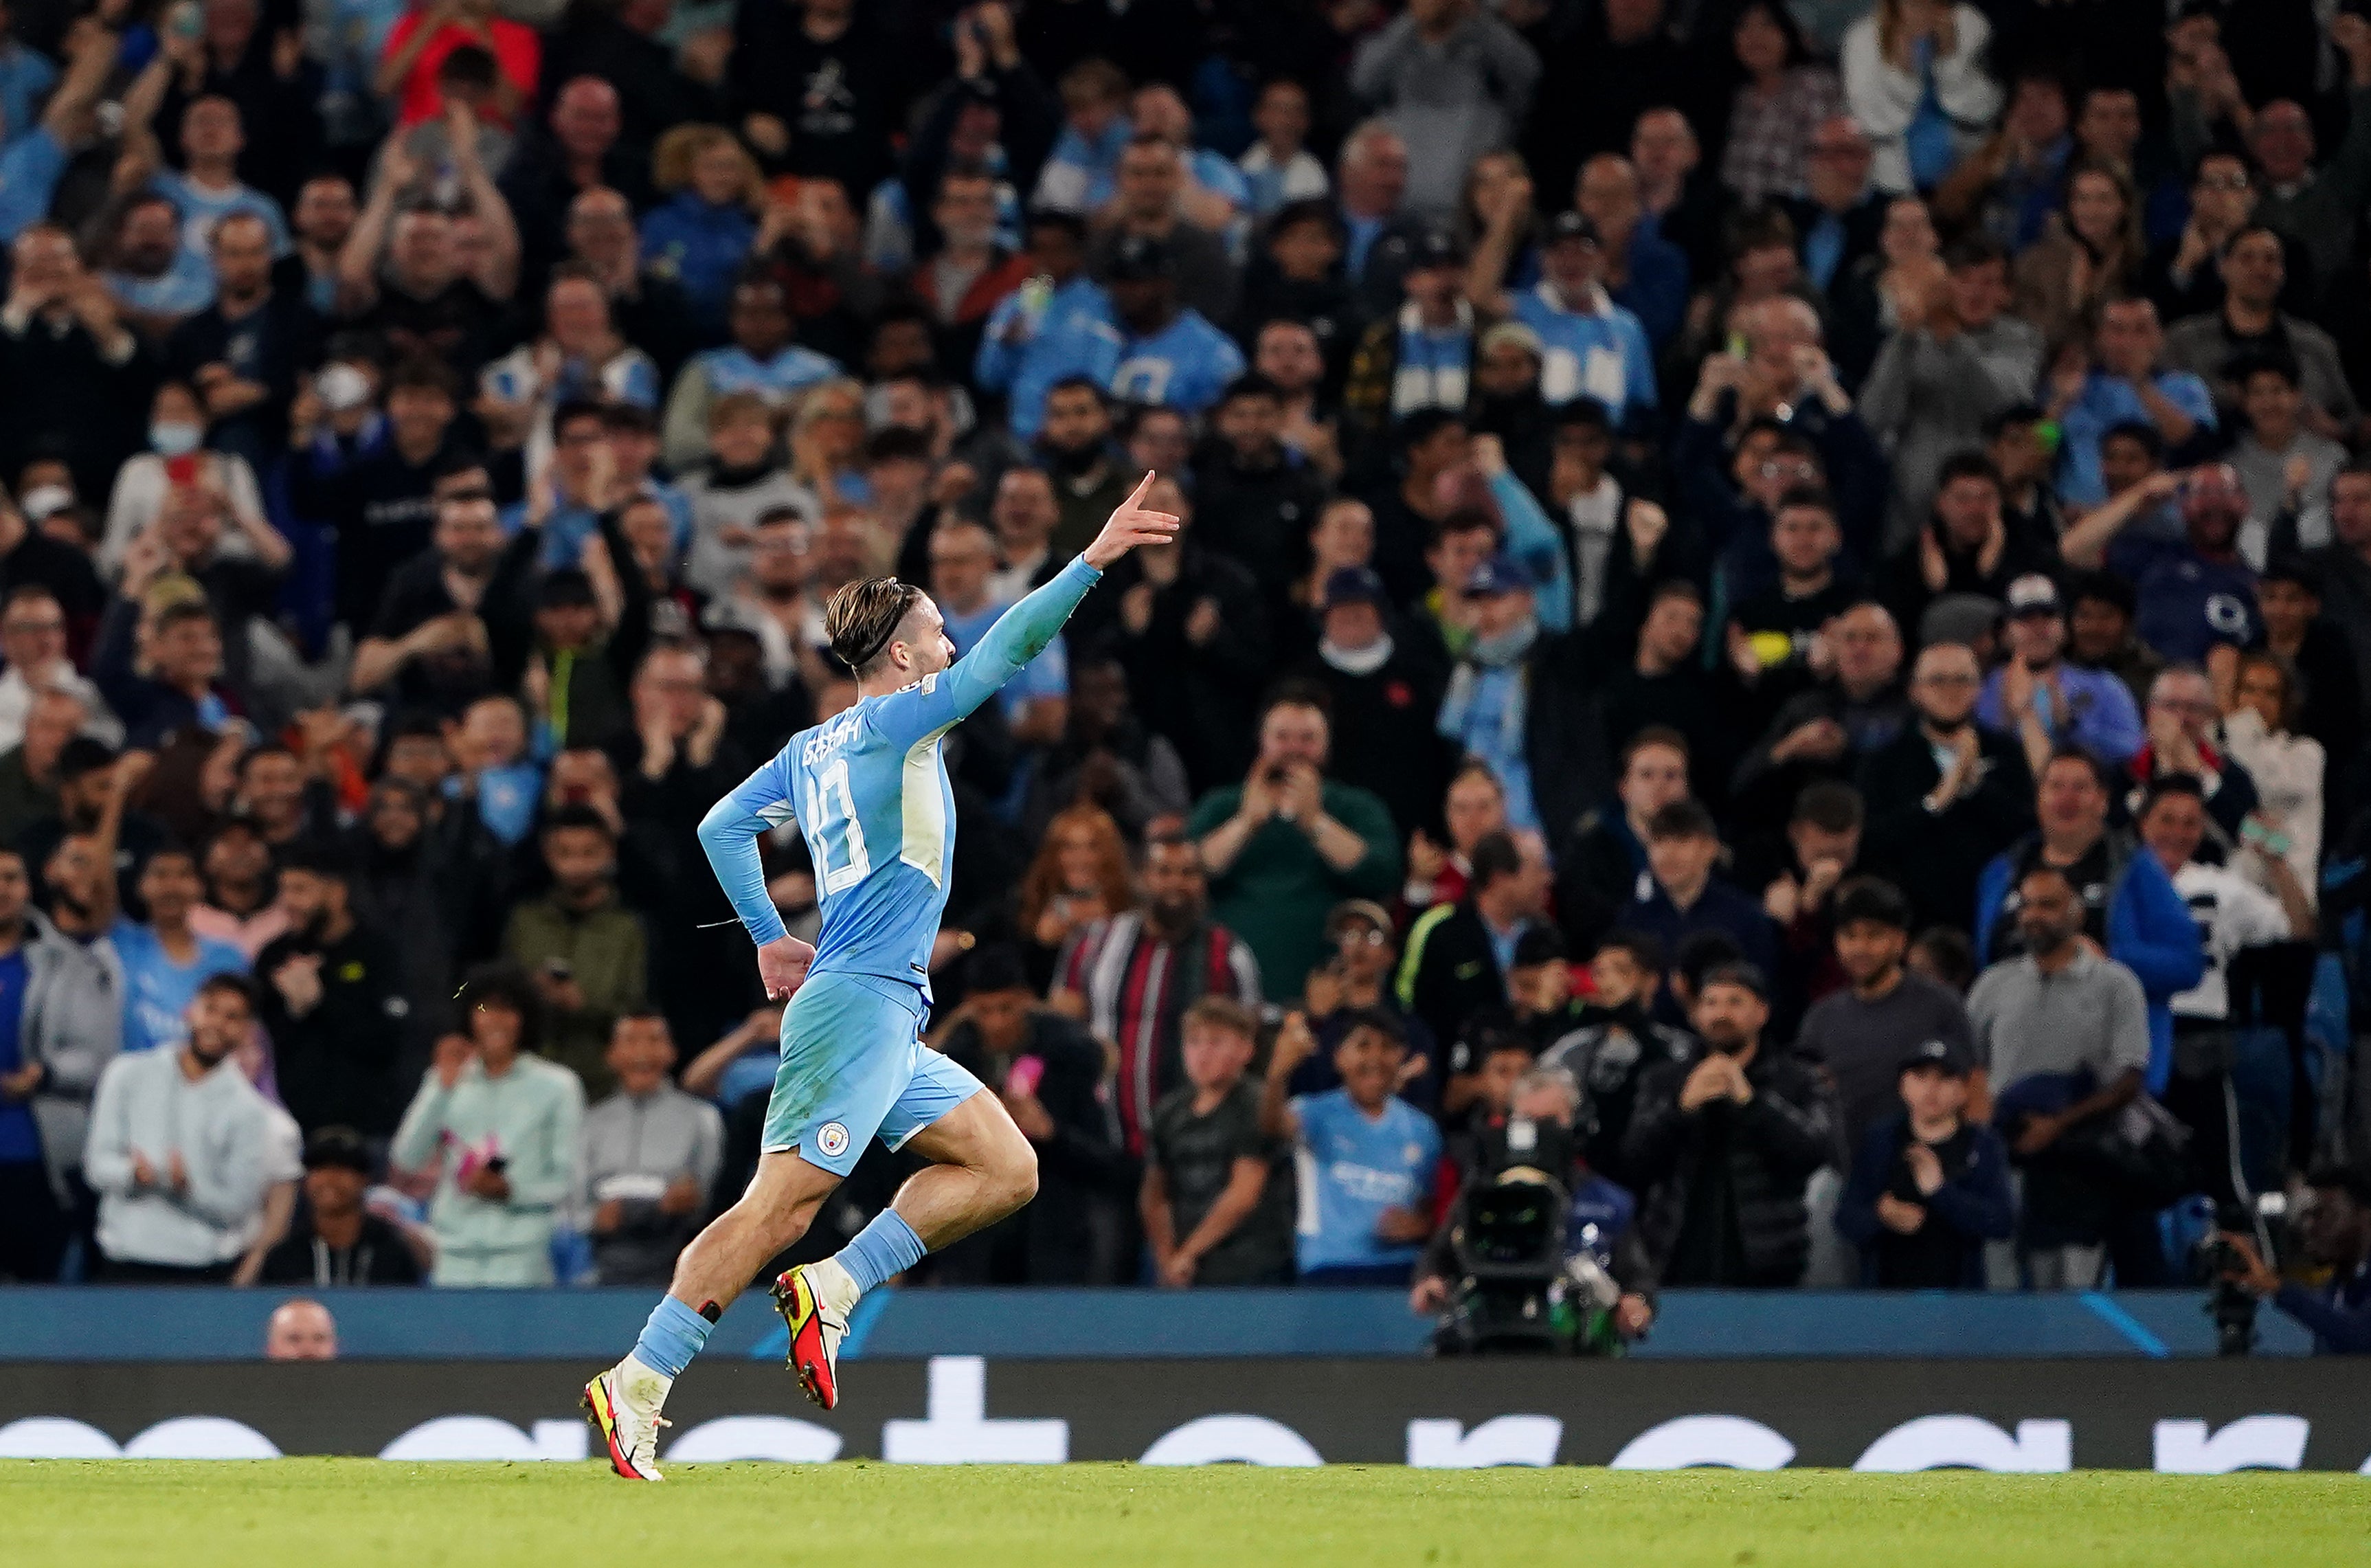 Jack Grealish celebrates scoring in the Champions League for Manchester City (Zac Goodwin/PA).